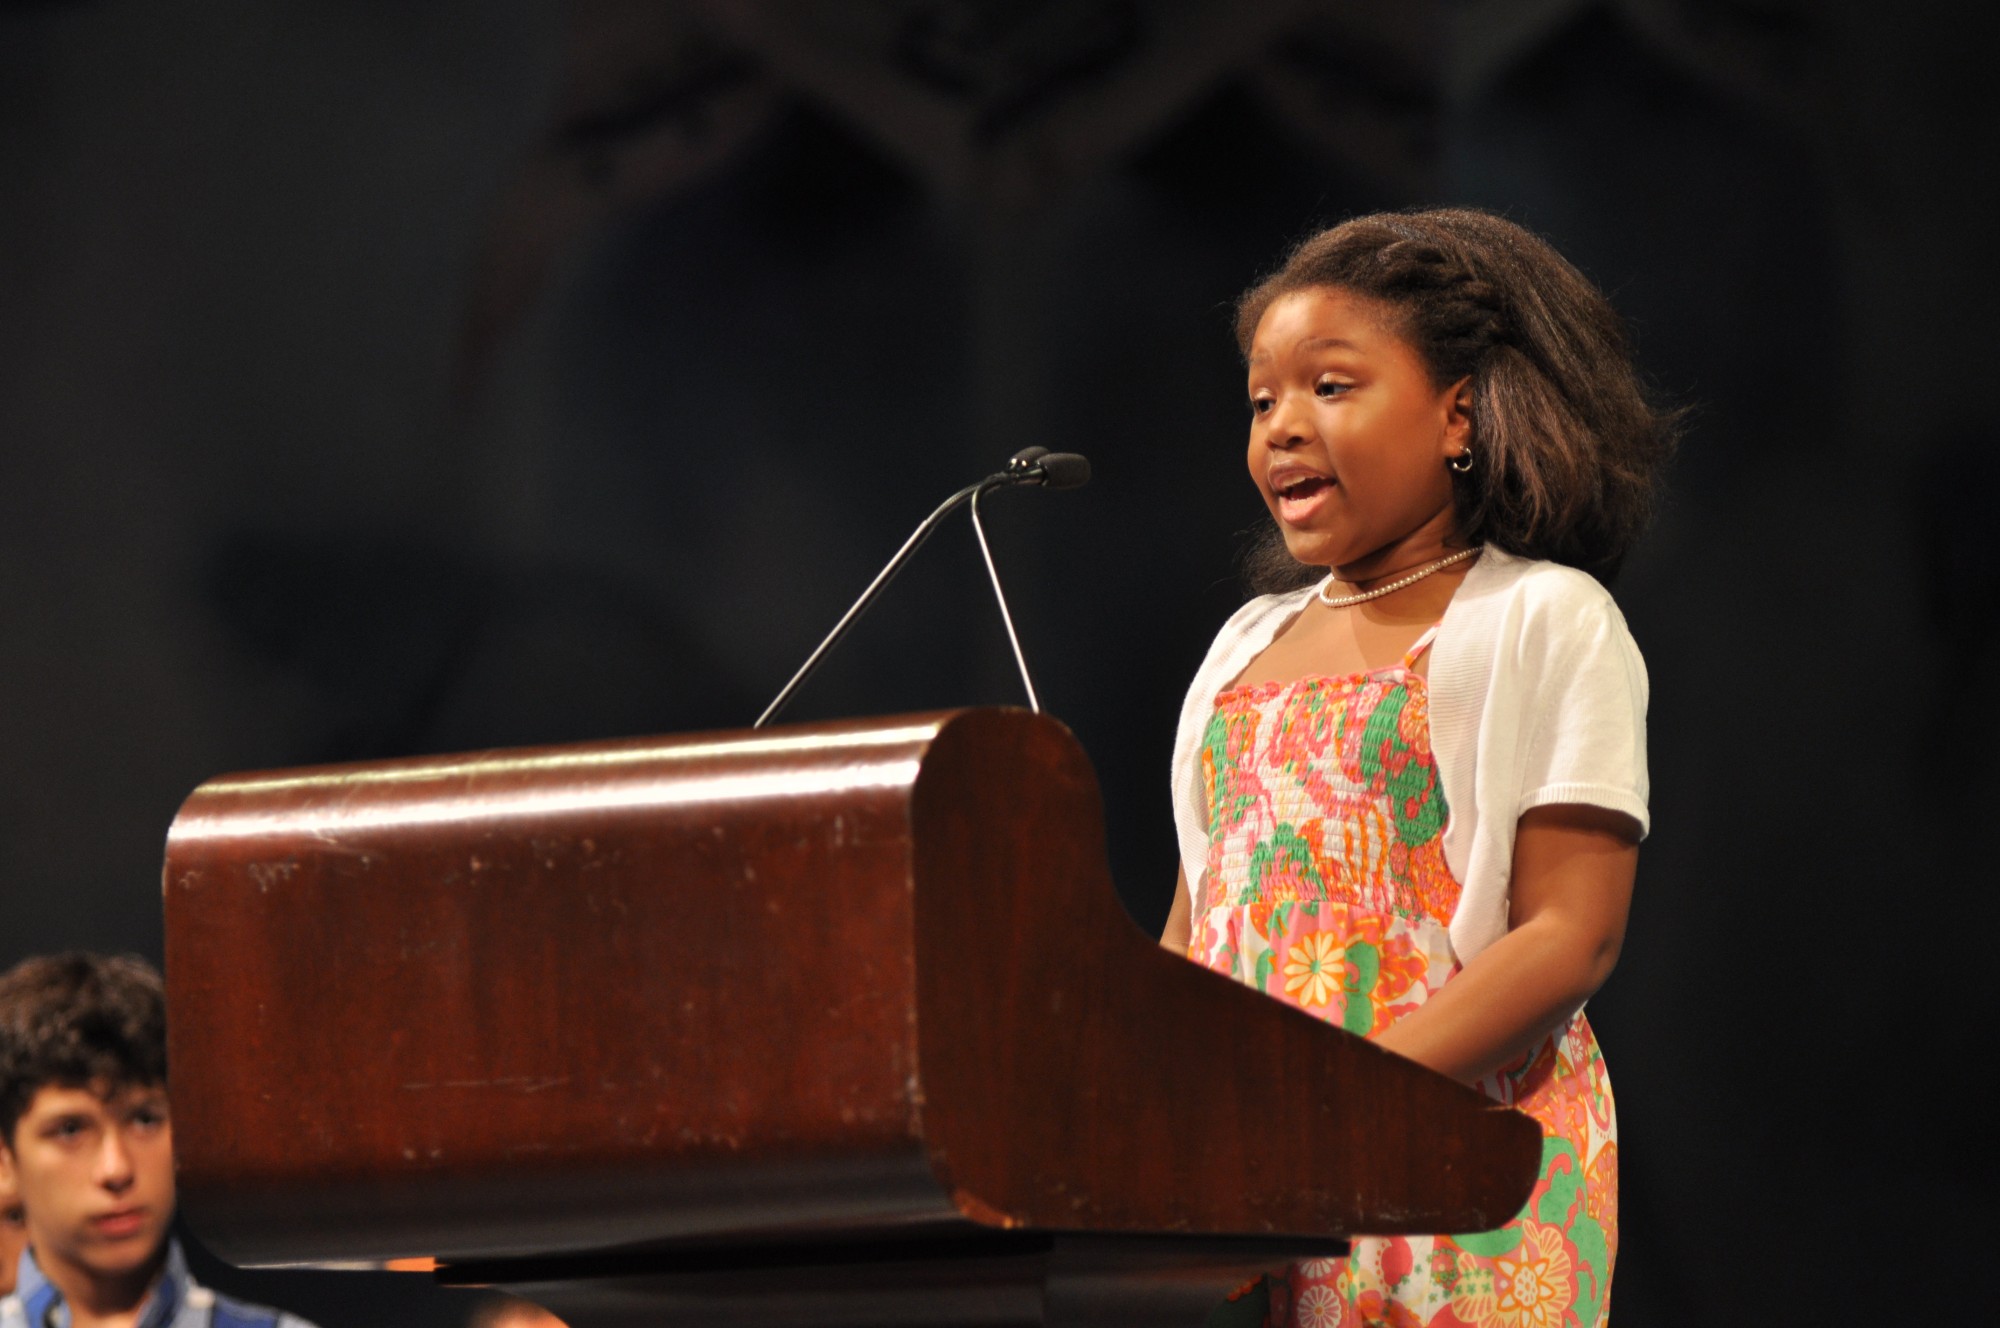 Elementary school student performing her speech behind a podium on stage at Ford’s Theatre.